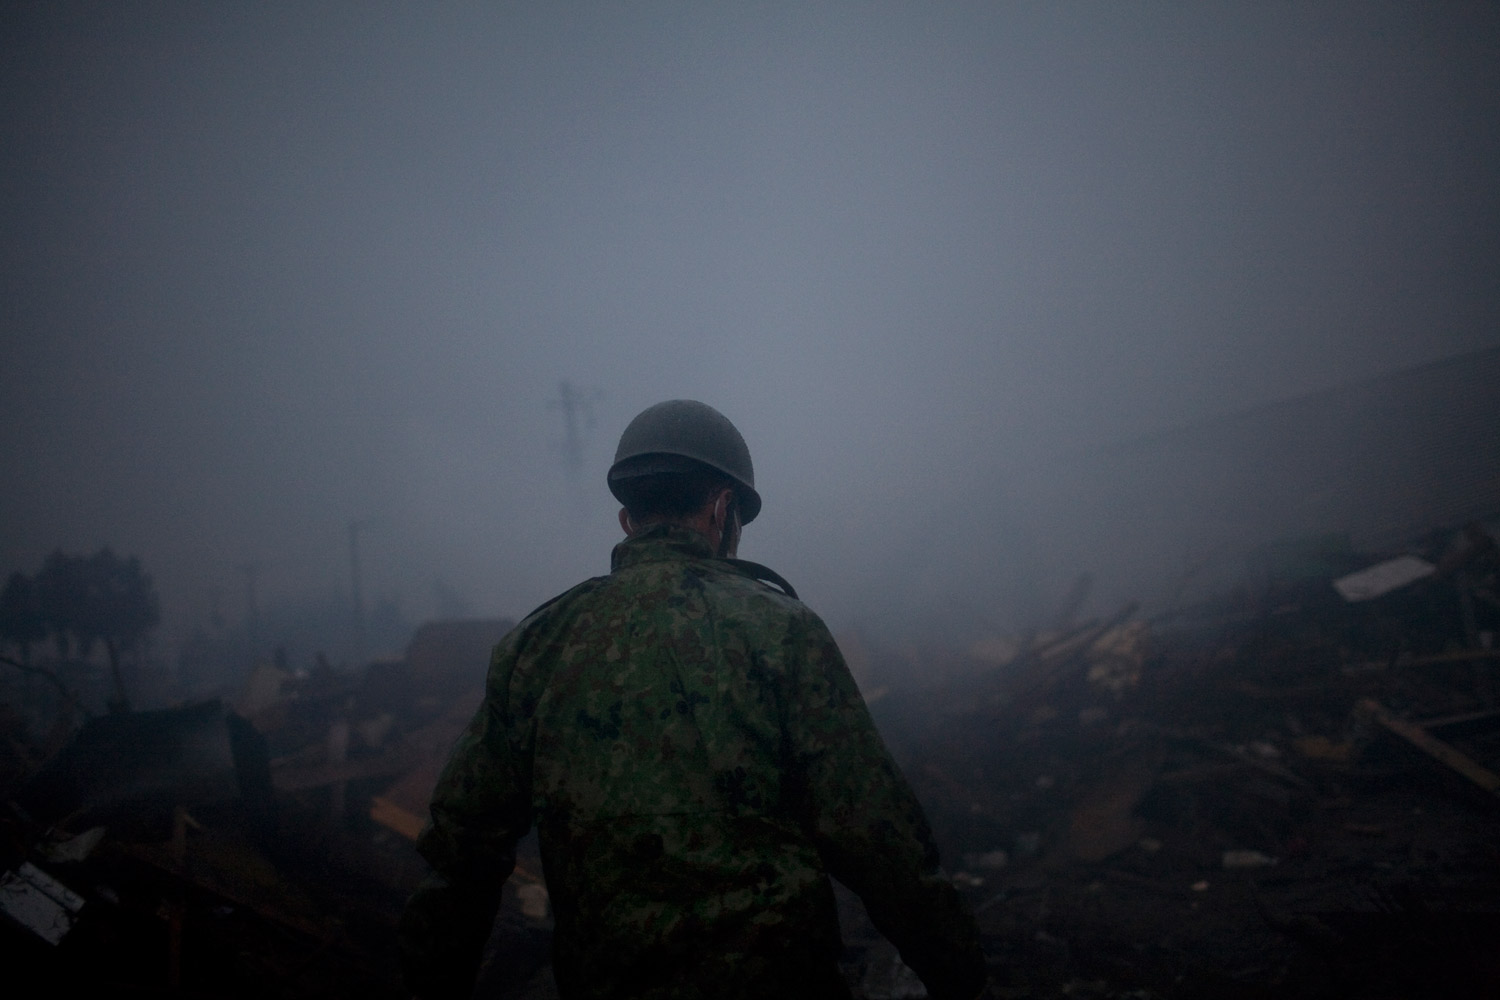 A soldier combs through debris looking for survivors in Natori on March 15, 2011